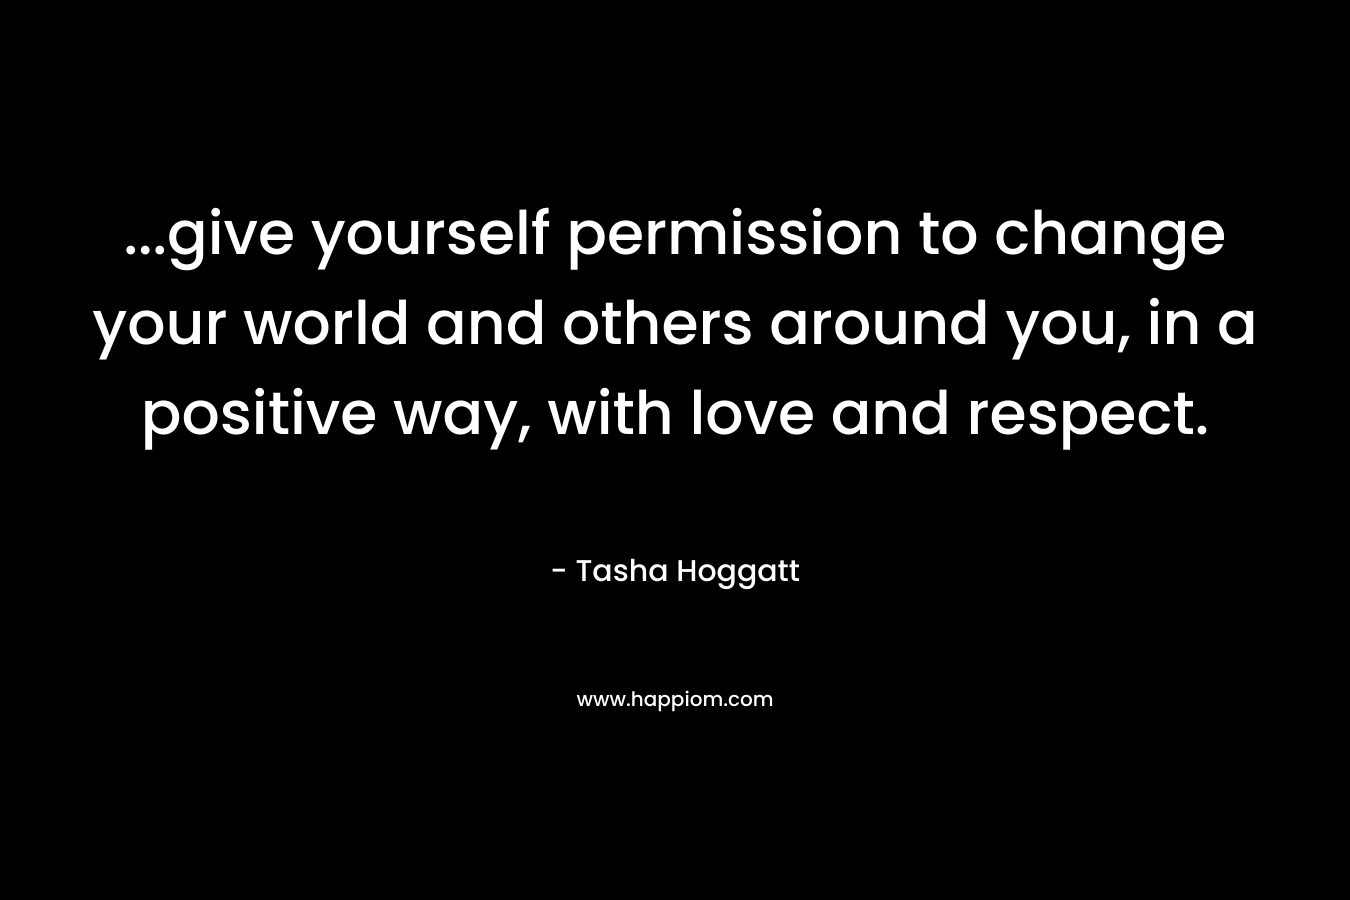 …give yourself permission to change your world and others around you, in a positive way, with love and respect. – Tasha Hoggatt